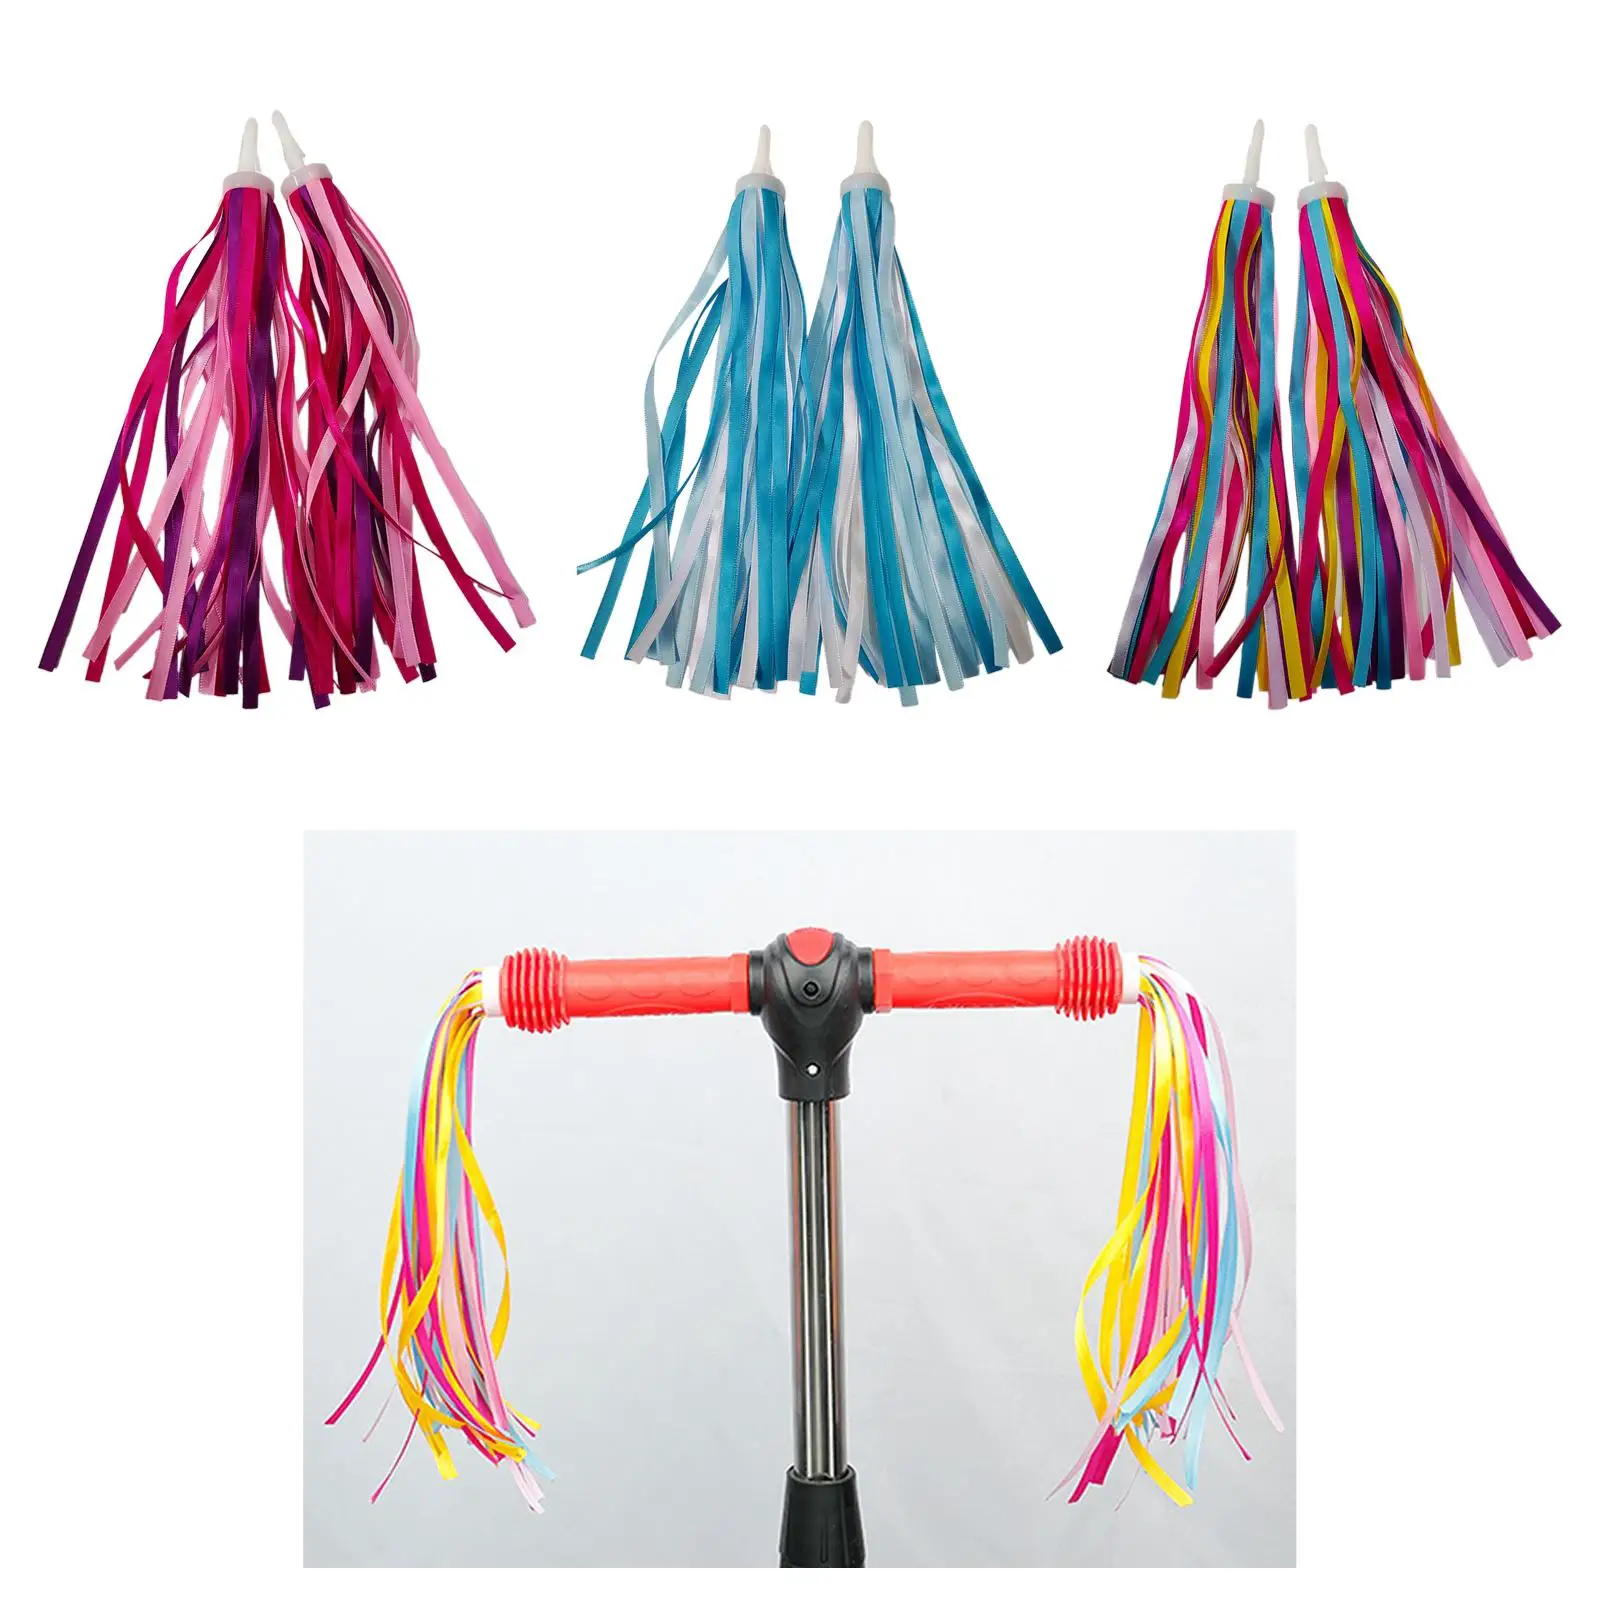 2 Pieces Bike Handlebar Tassels Colorful Windsock Decor Streamers Fittings for